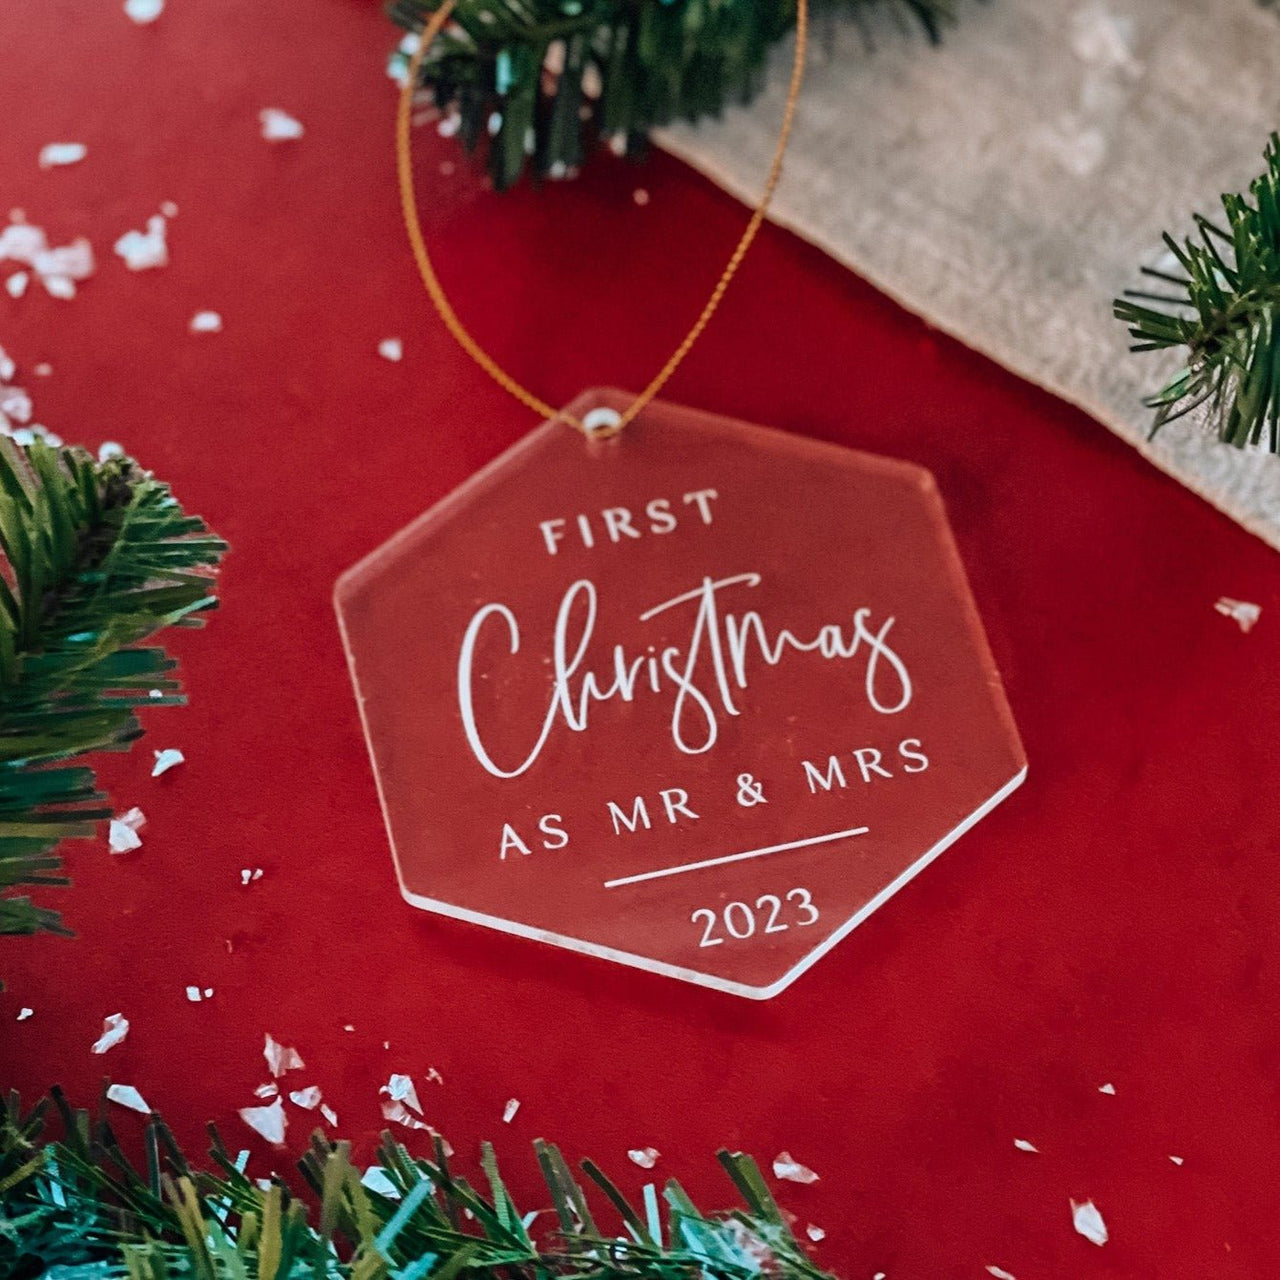 First Christmas As Mr & Mrs Acrylic Ornament - Rich Design Co